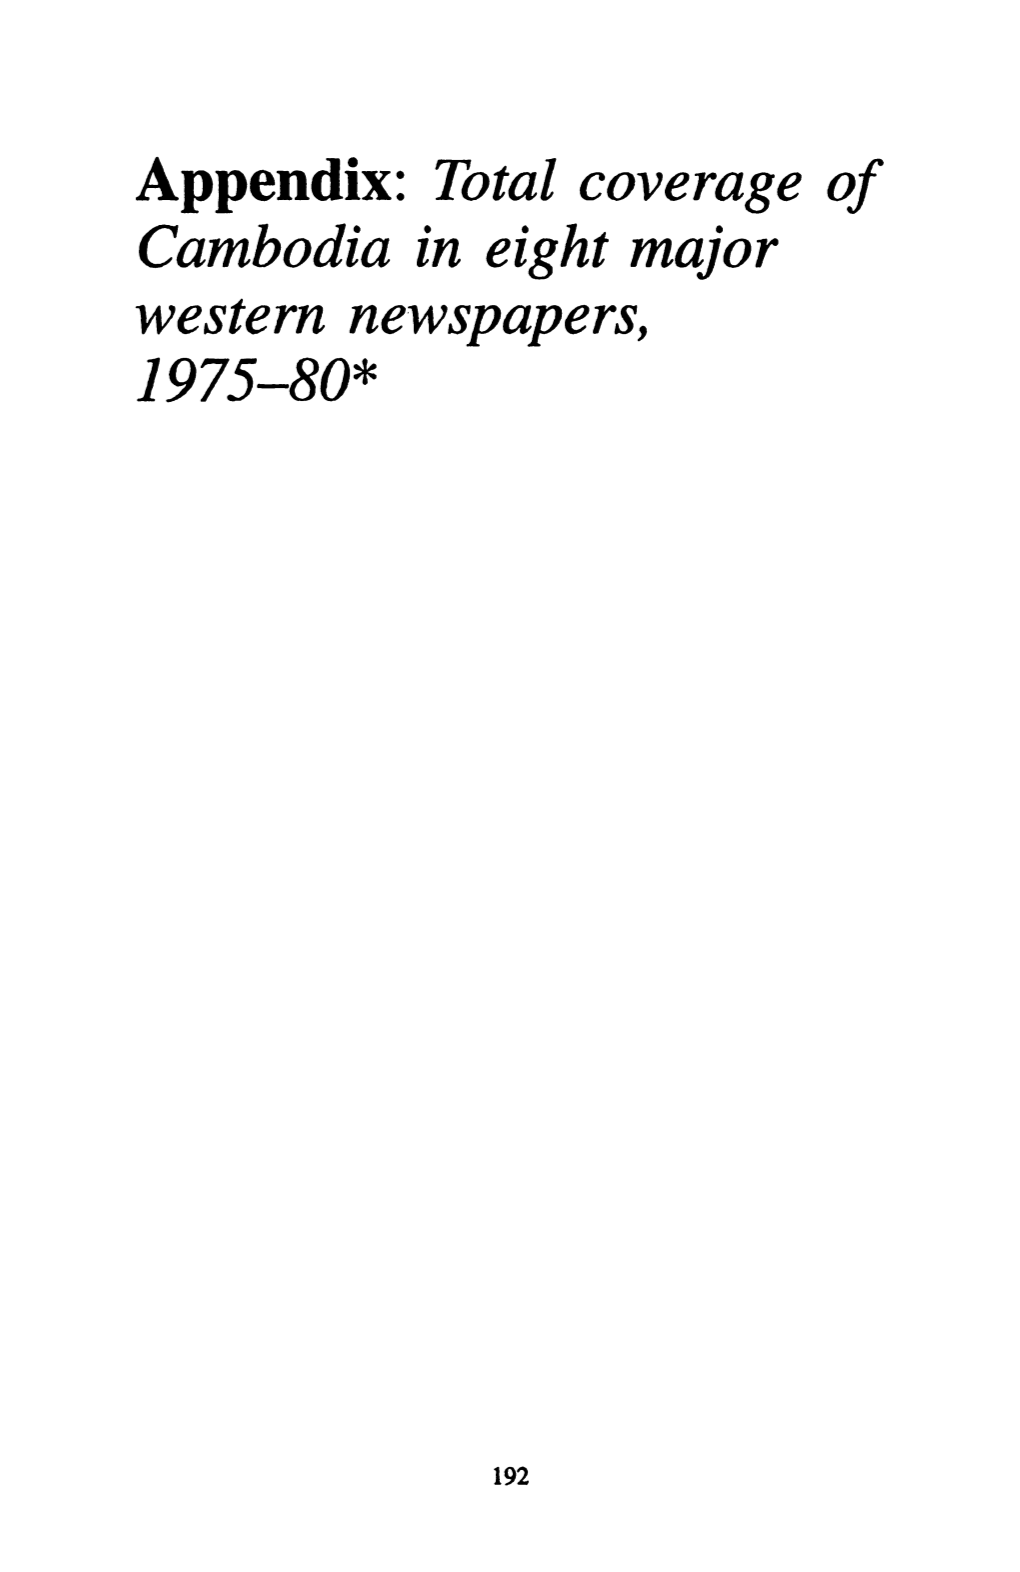 Total Coverage of Cambodia in Eight Major Western Newspapers, 1975-80*